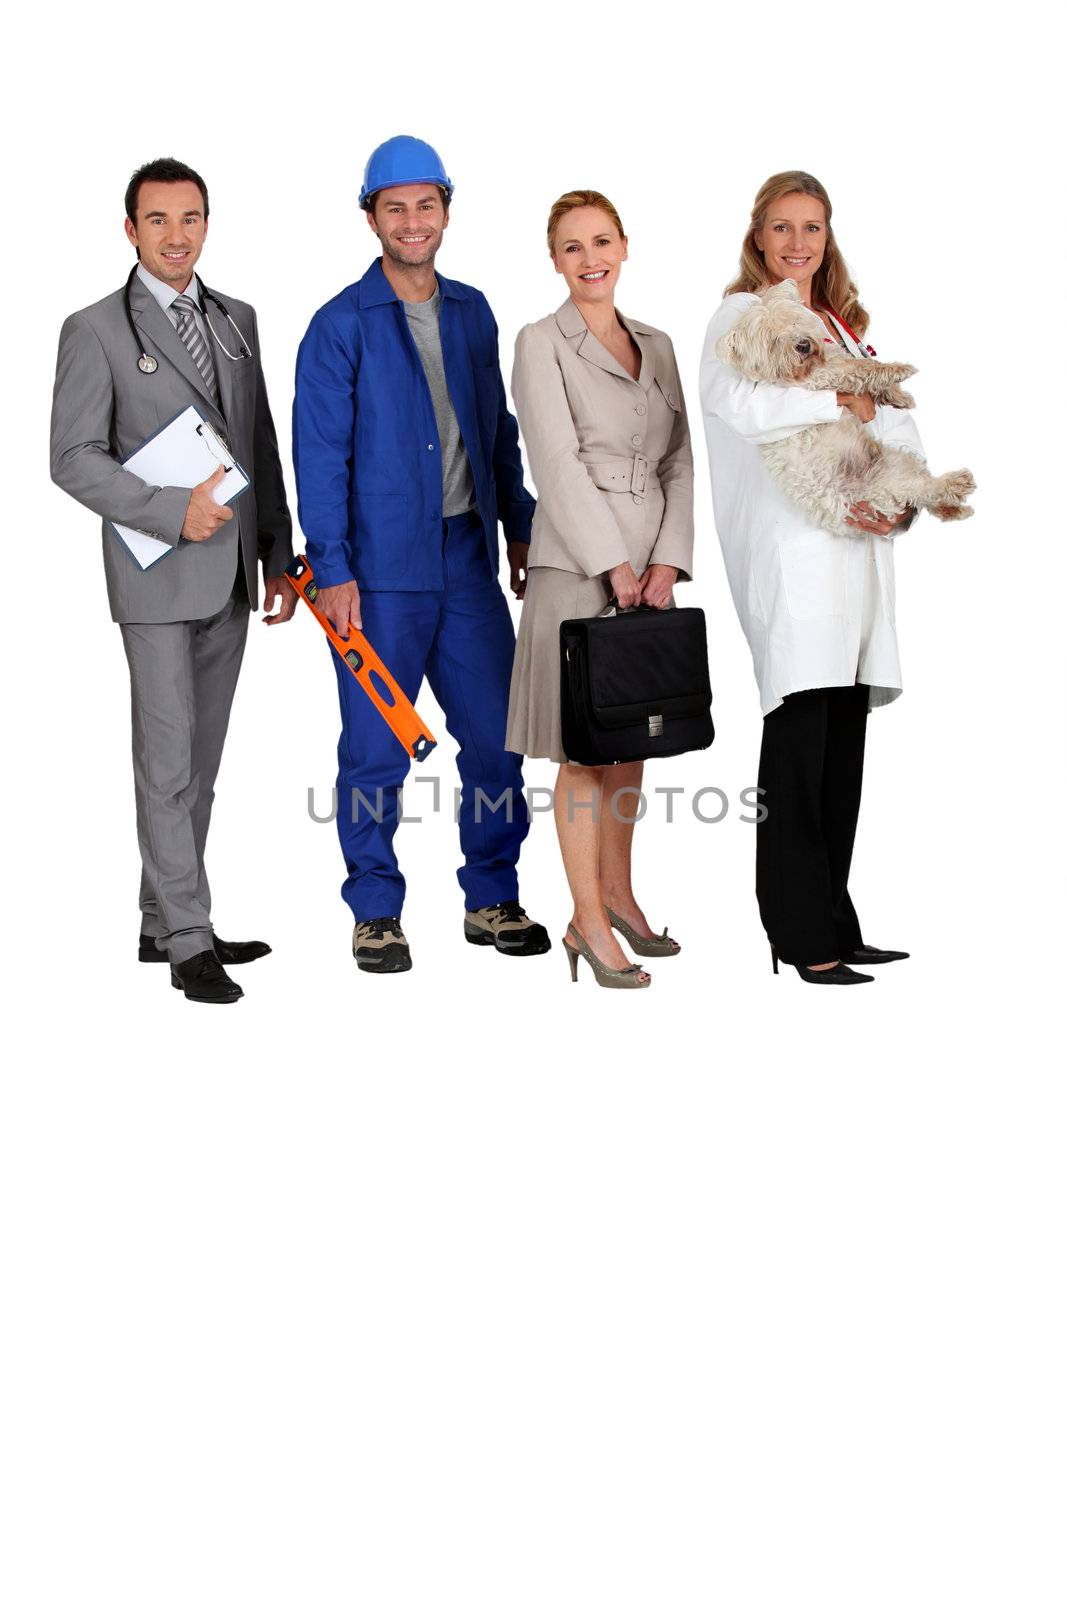 A doctor, a workman, an office woman and a vet with a dog in her arms all looking at us.